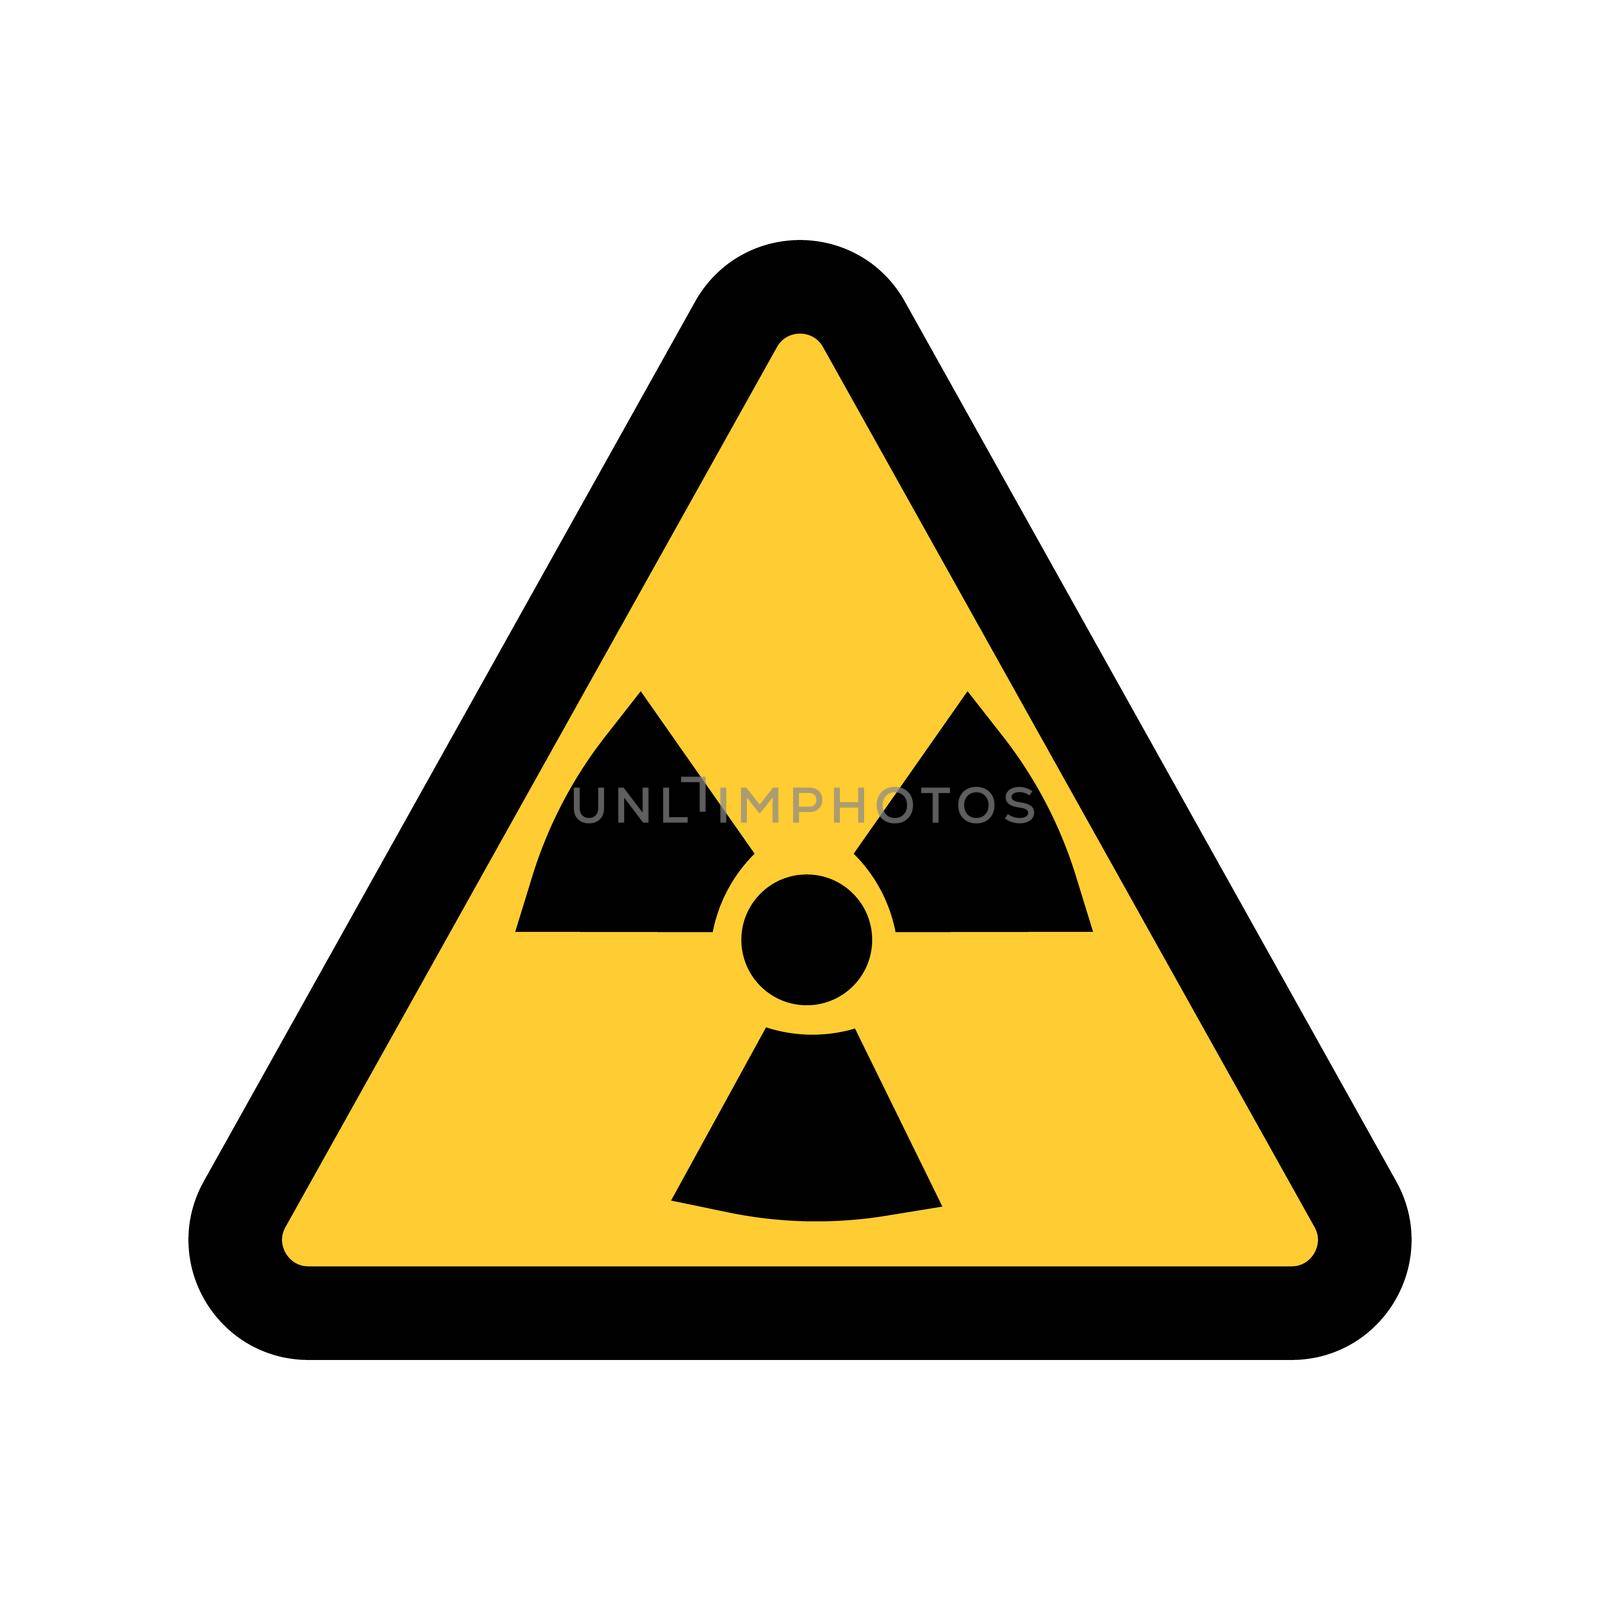 illustration of radiation warning sign, isolated on white background by Alxyzt